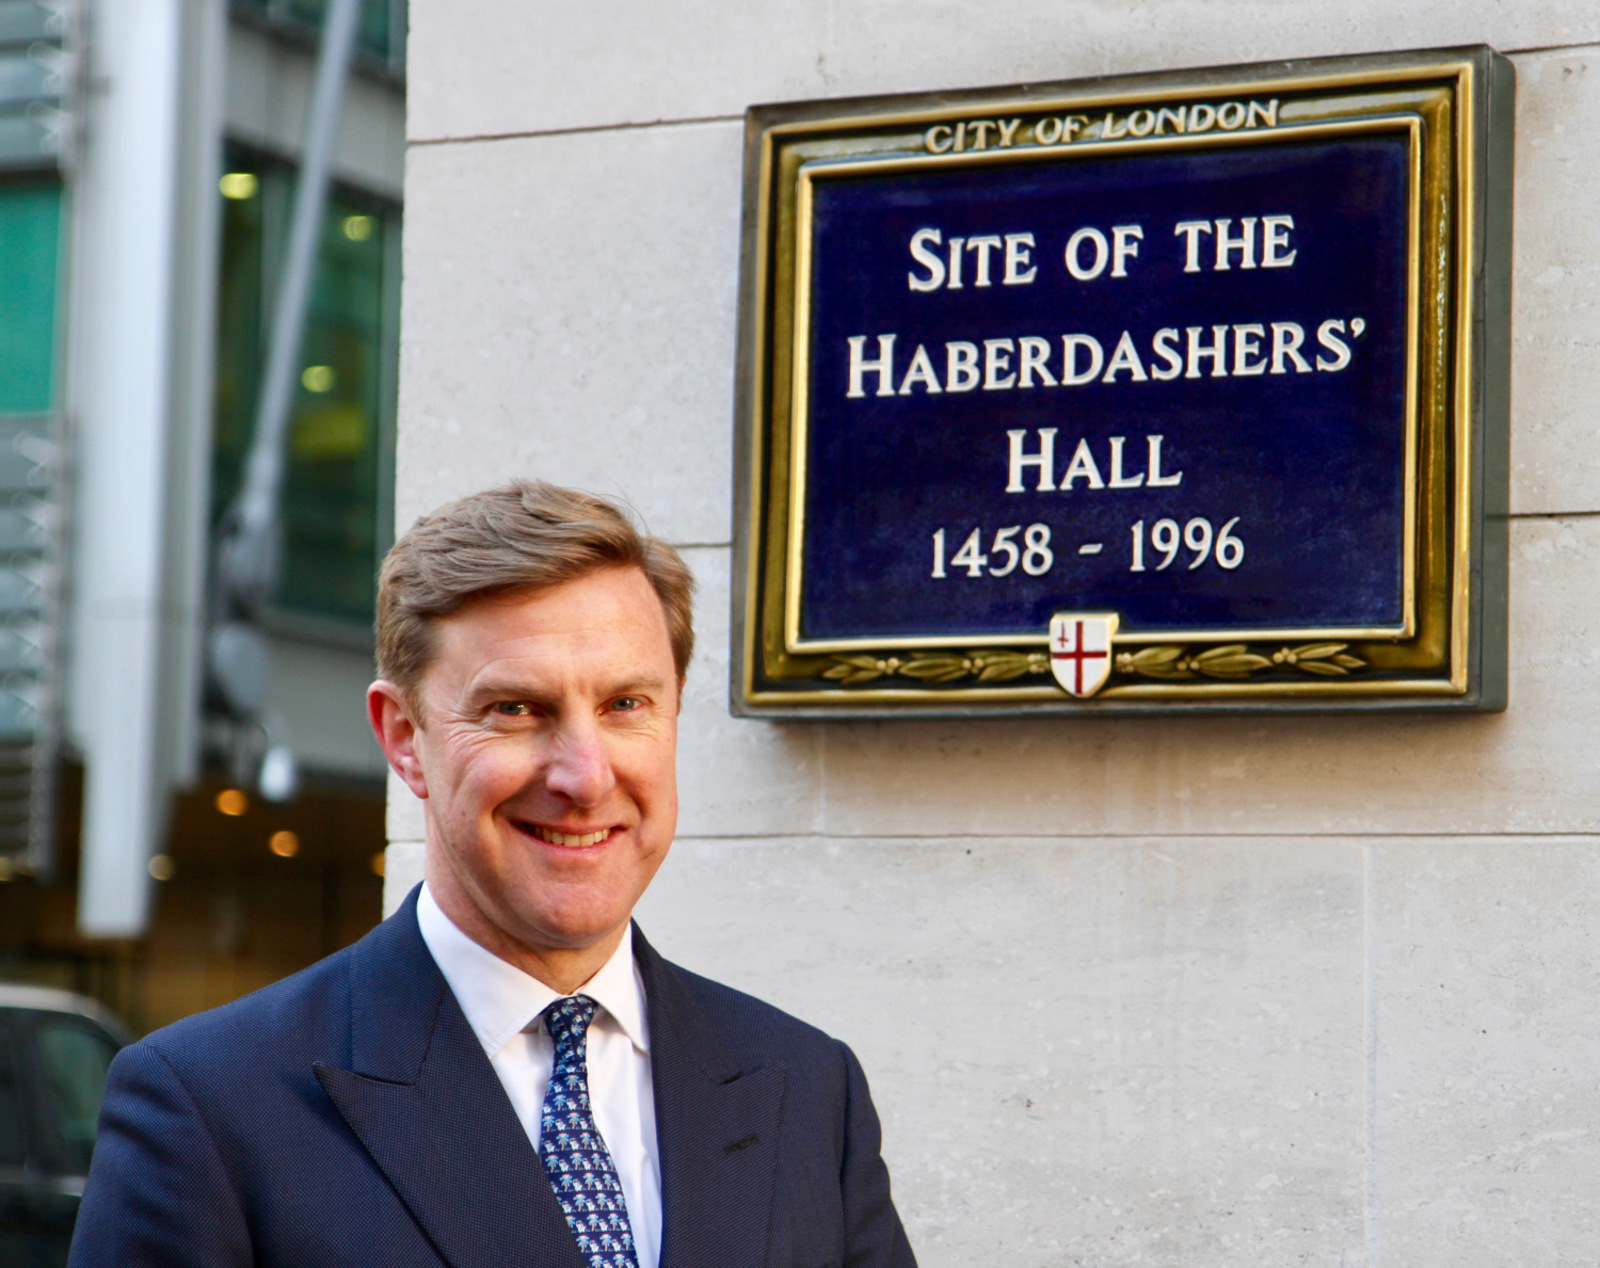 Historic Site Of The Haberdasher's Hall - One of the Great Twelve Livery Companies - on Gresham Street